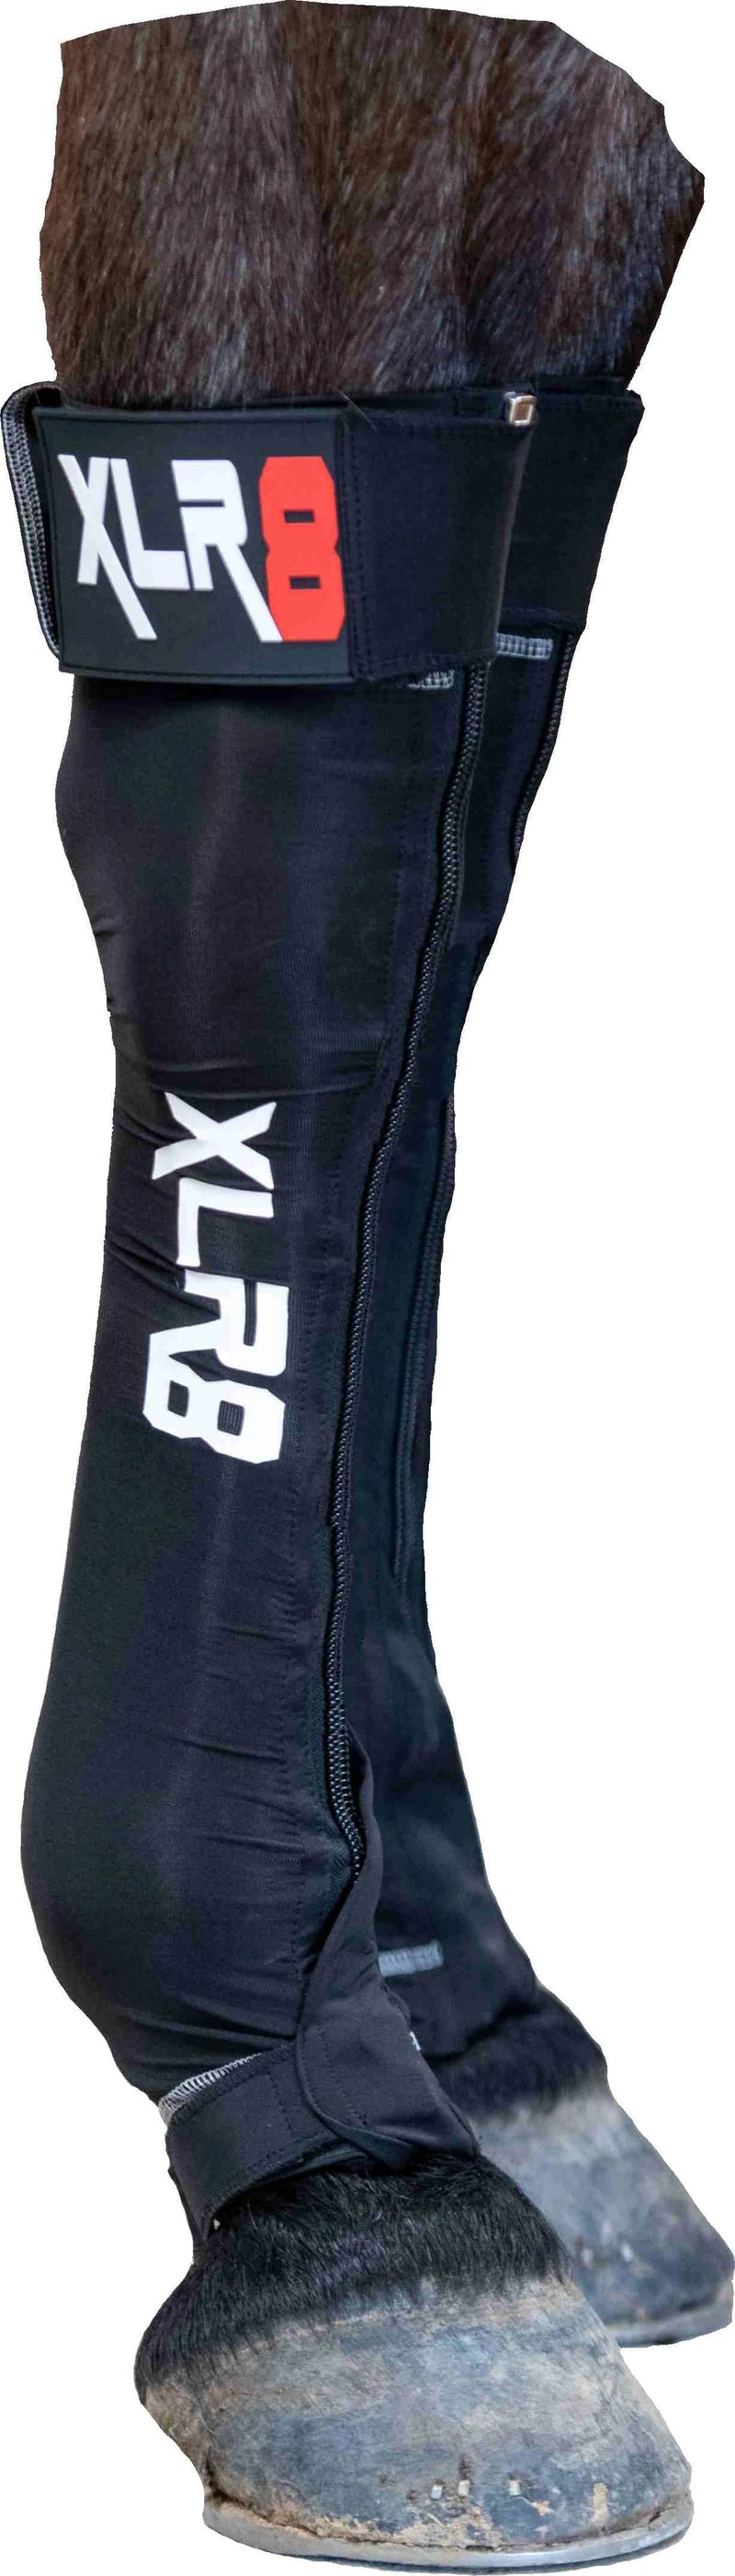 XLR8 HIND G-Force Compression Boots